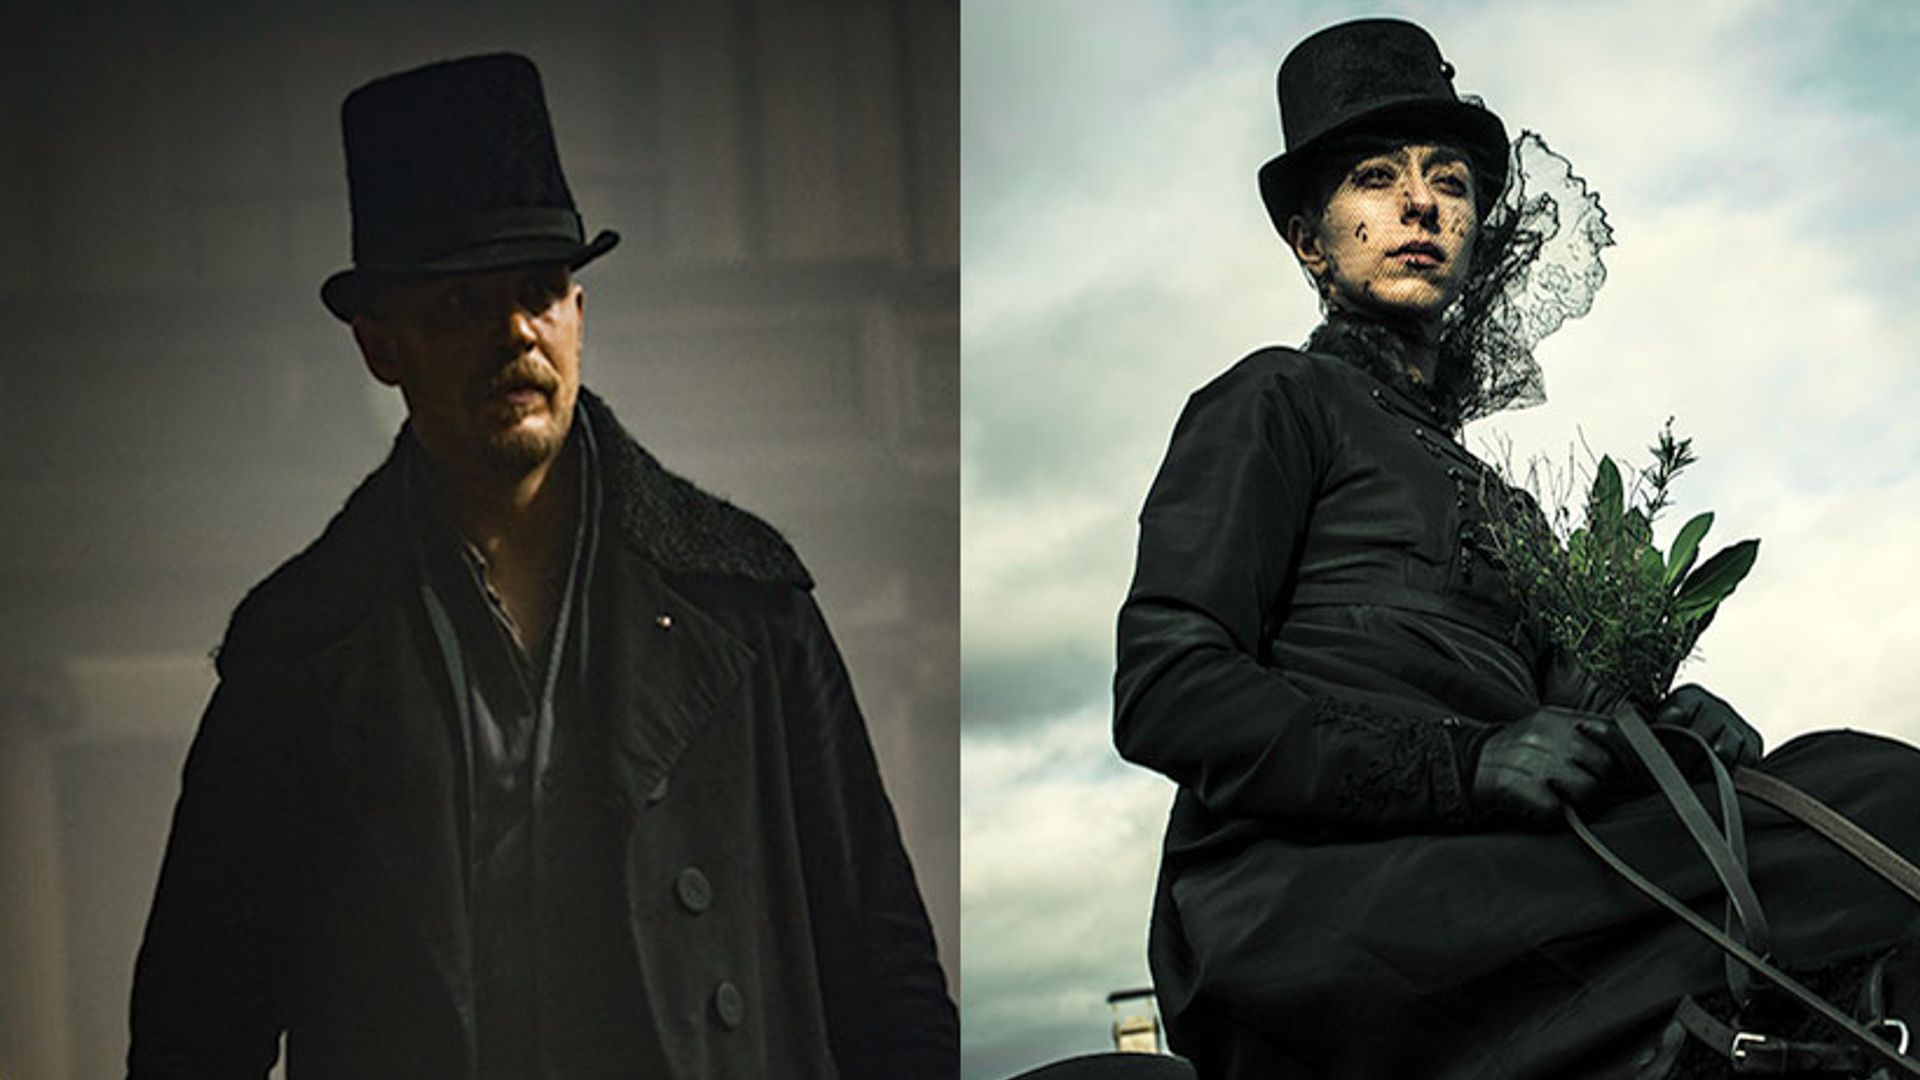 Taboo's costume designer Joanna Eatwell on the challenges of dressing Tom Hardy